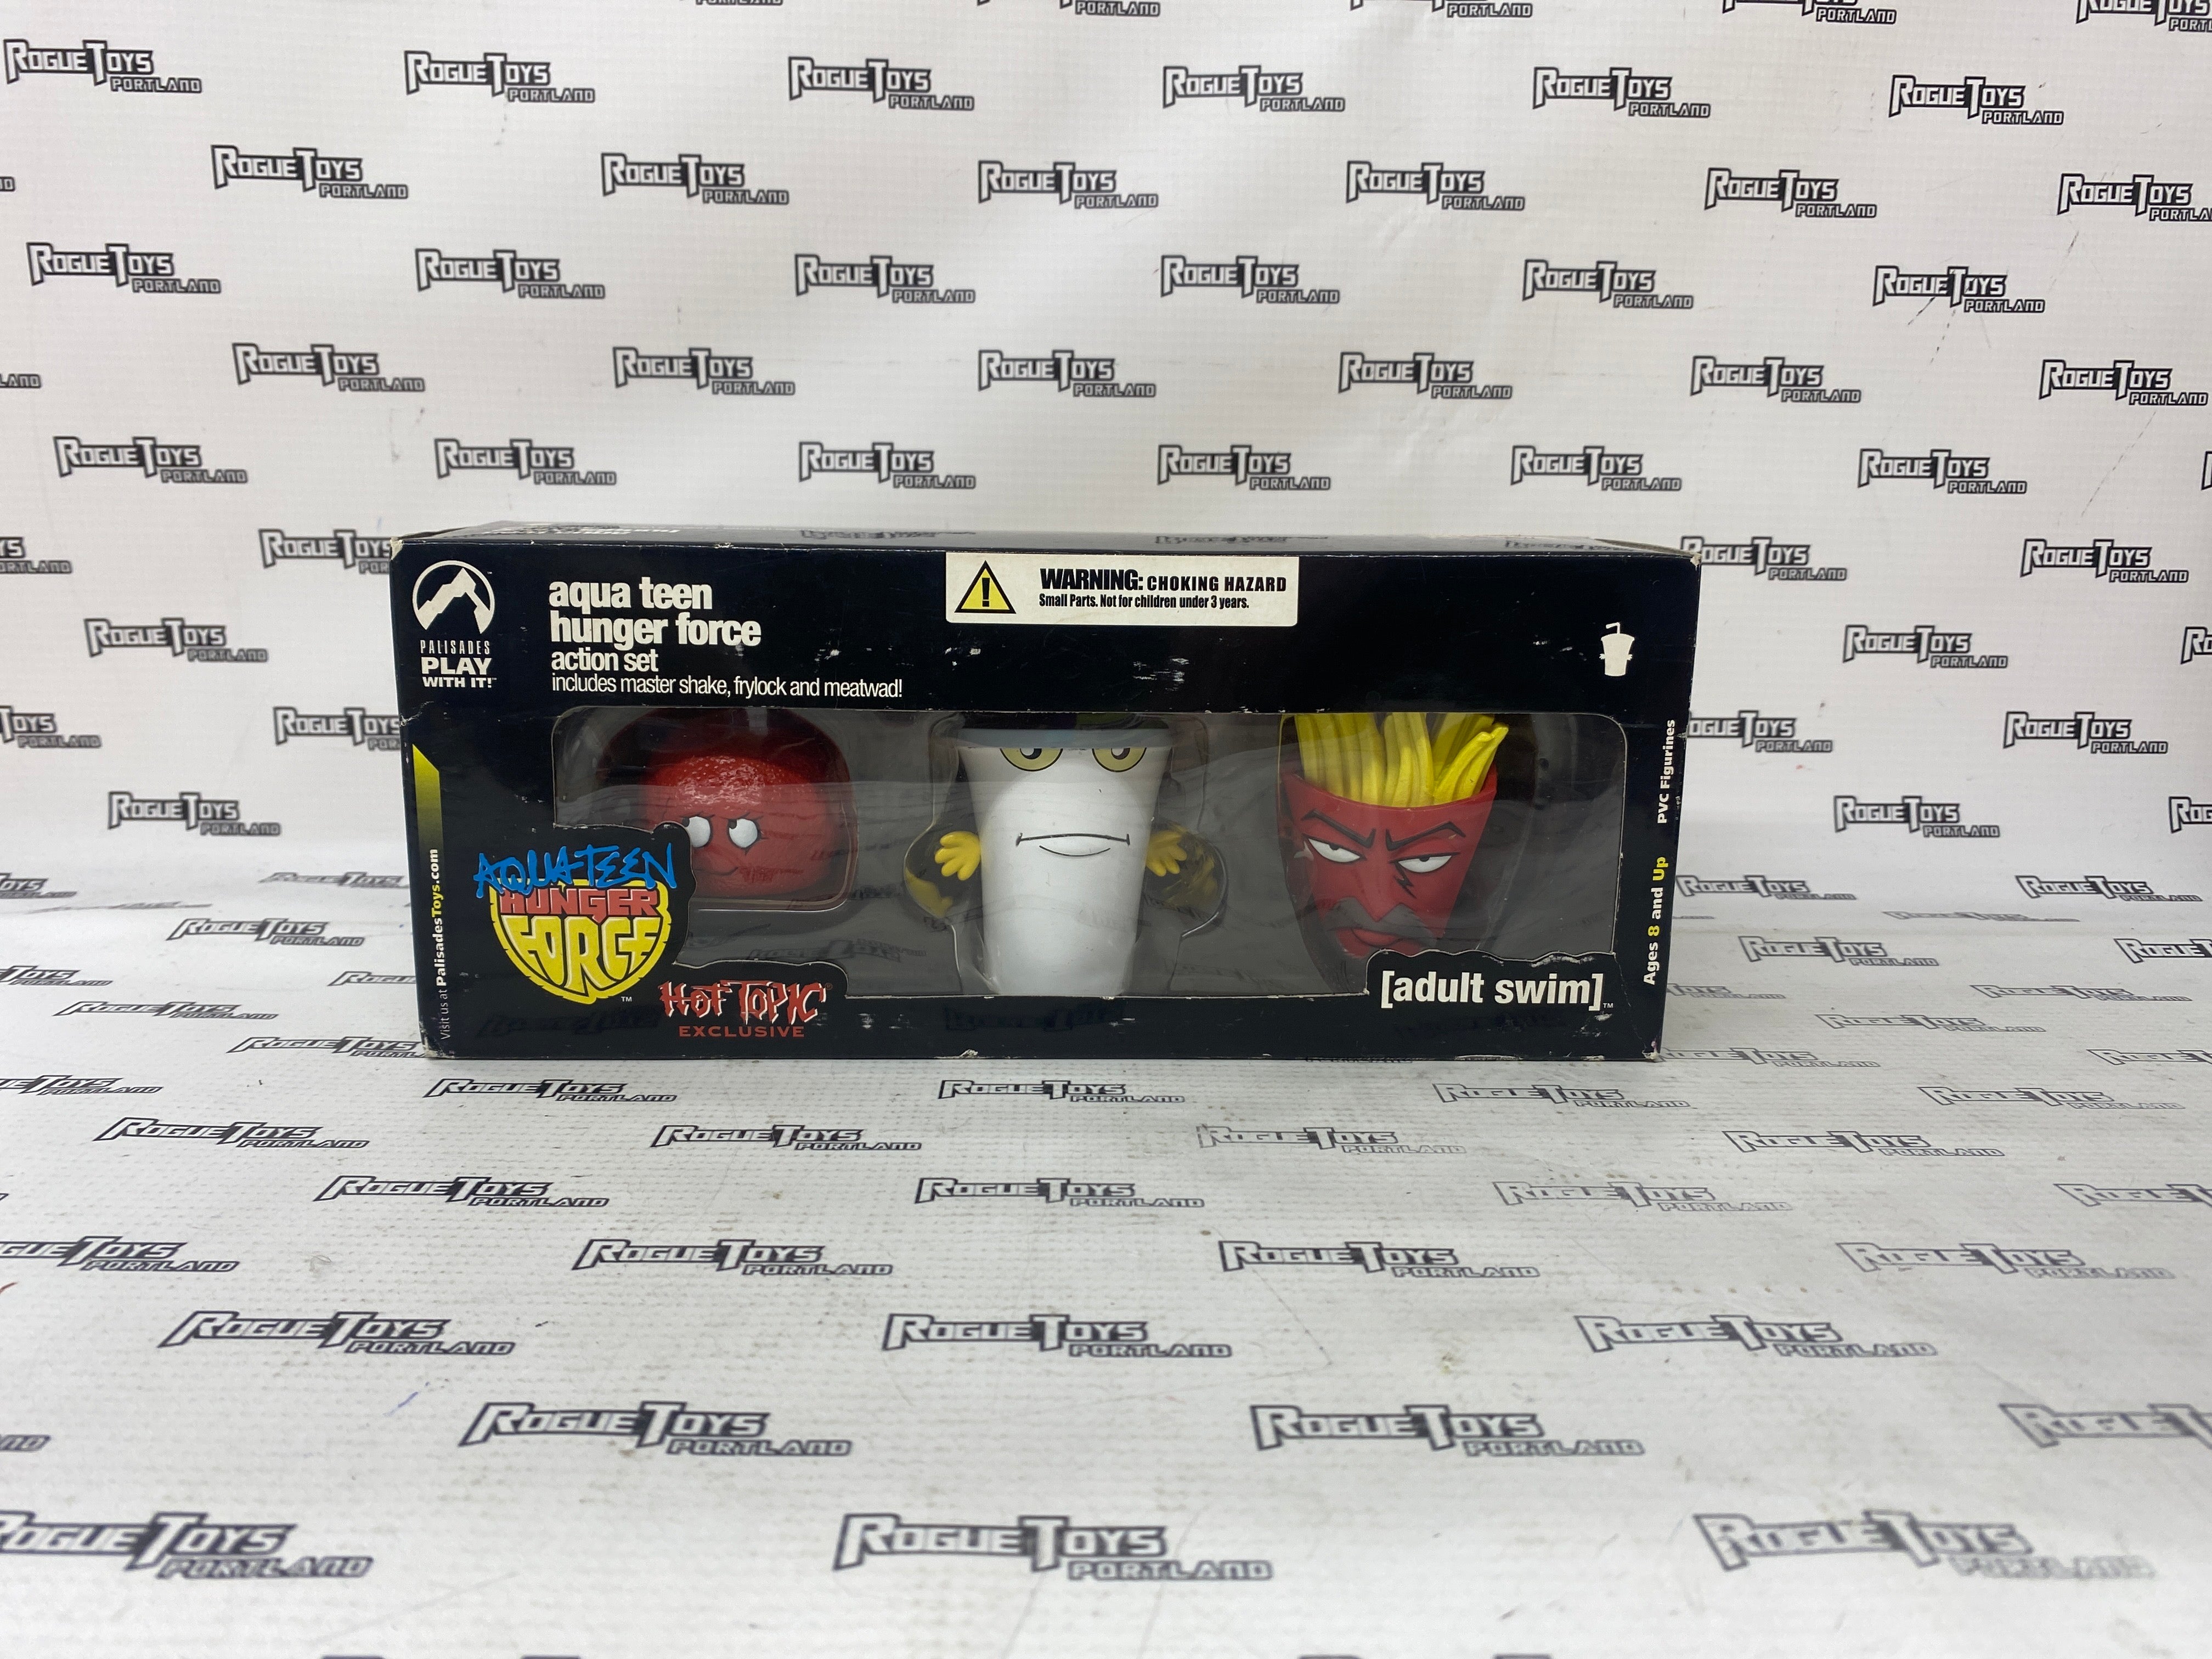 Palisades Aqua Teen Hunger Force Action Set PVC Figurines Hot Topic Exclusive